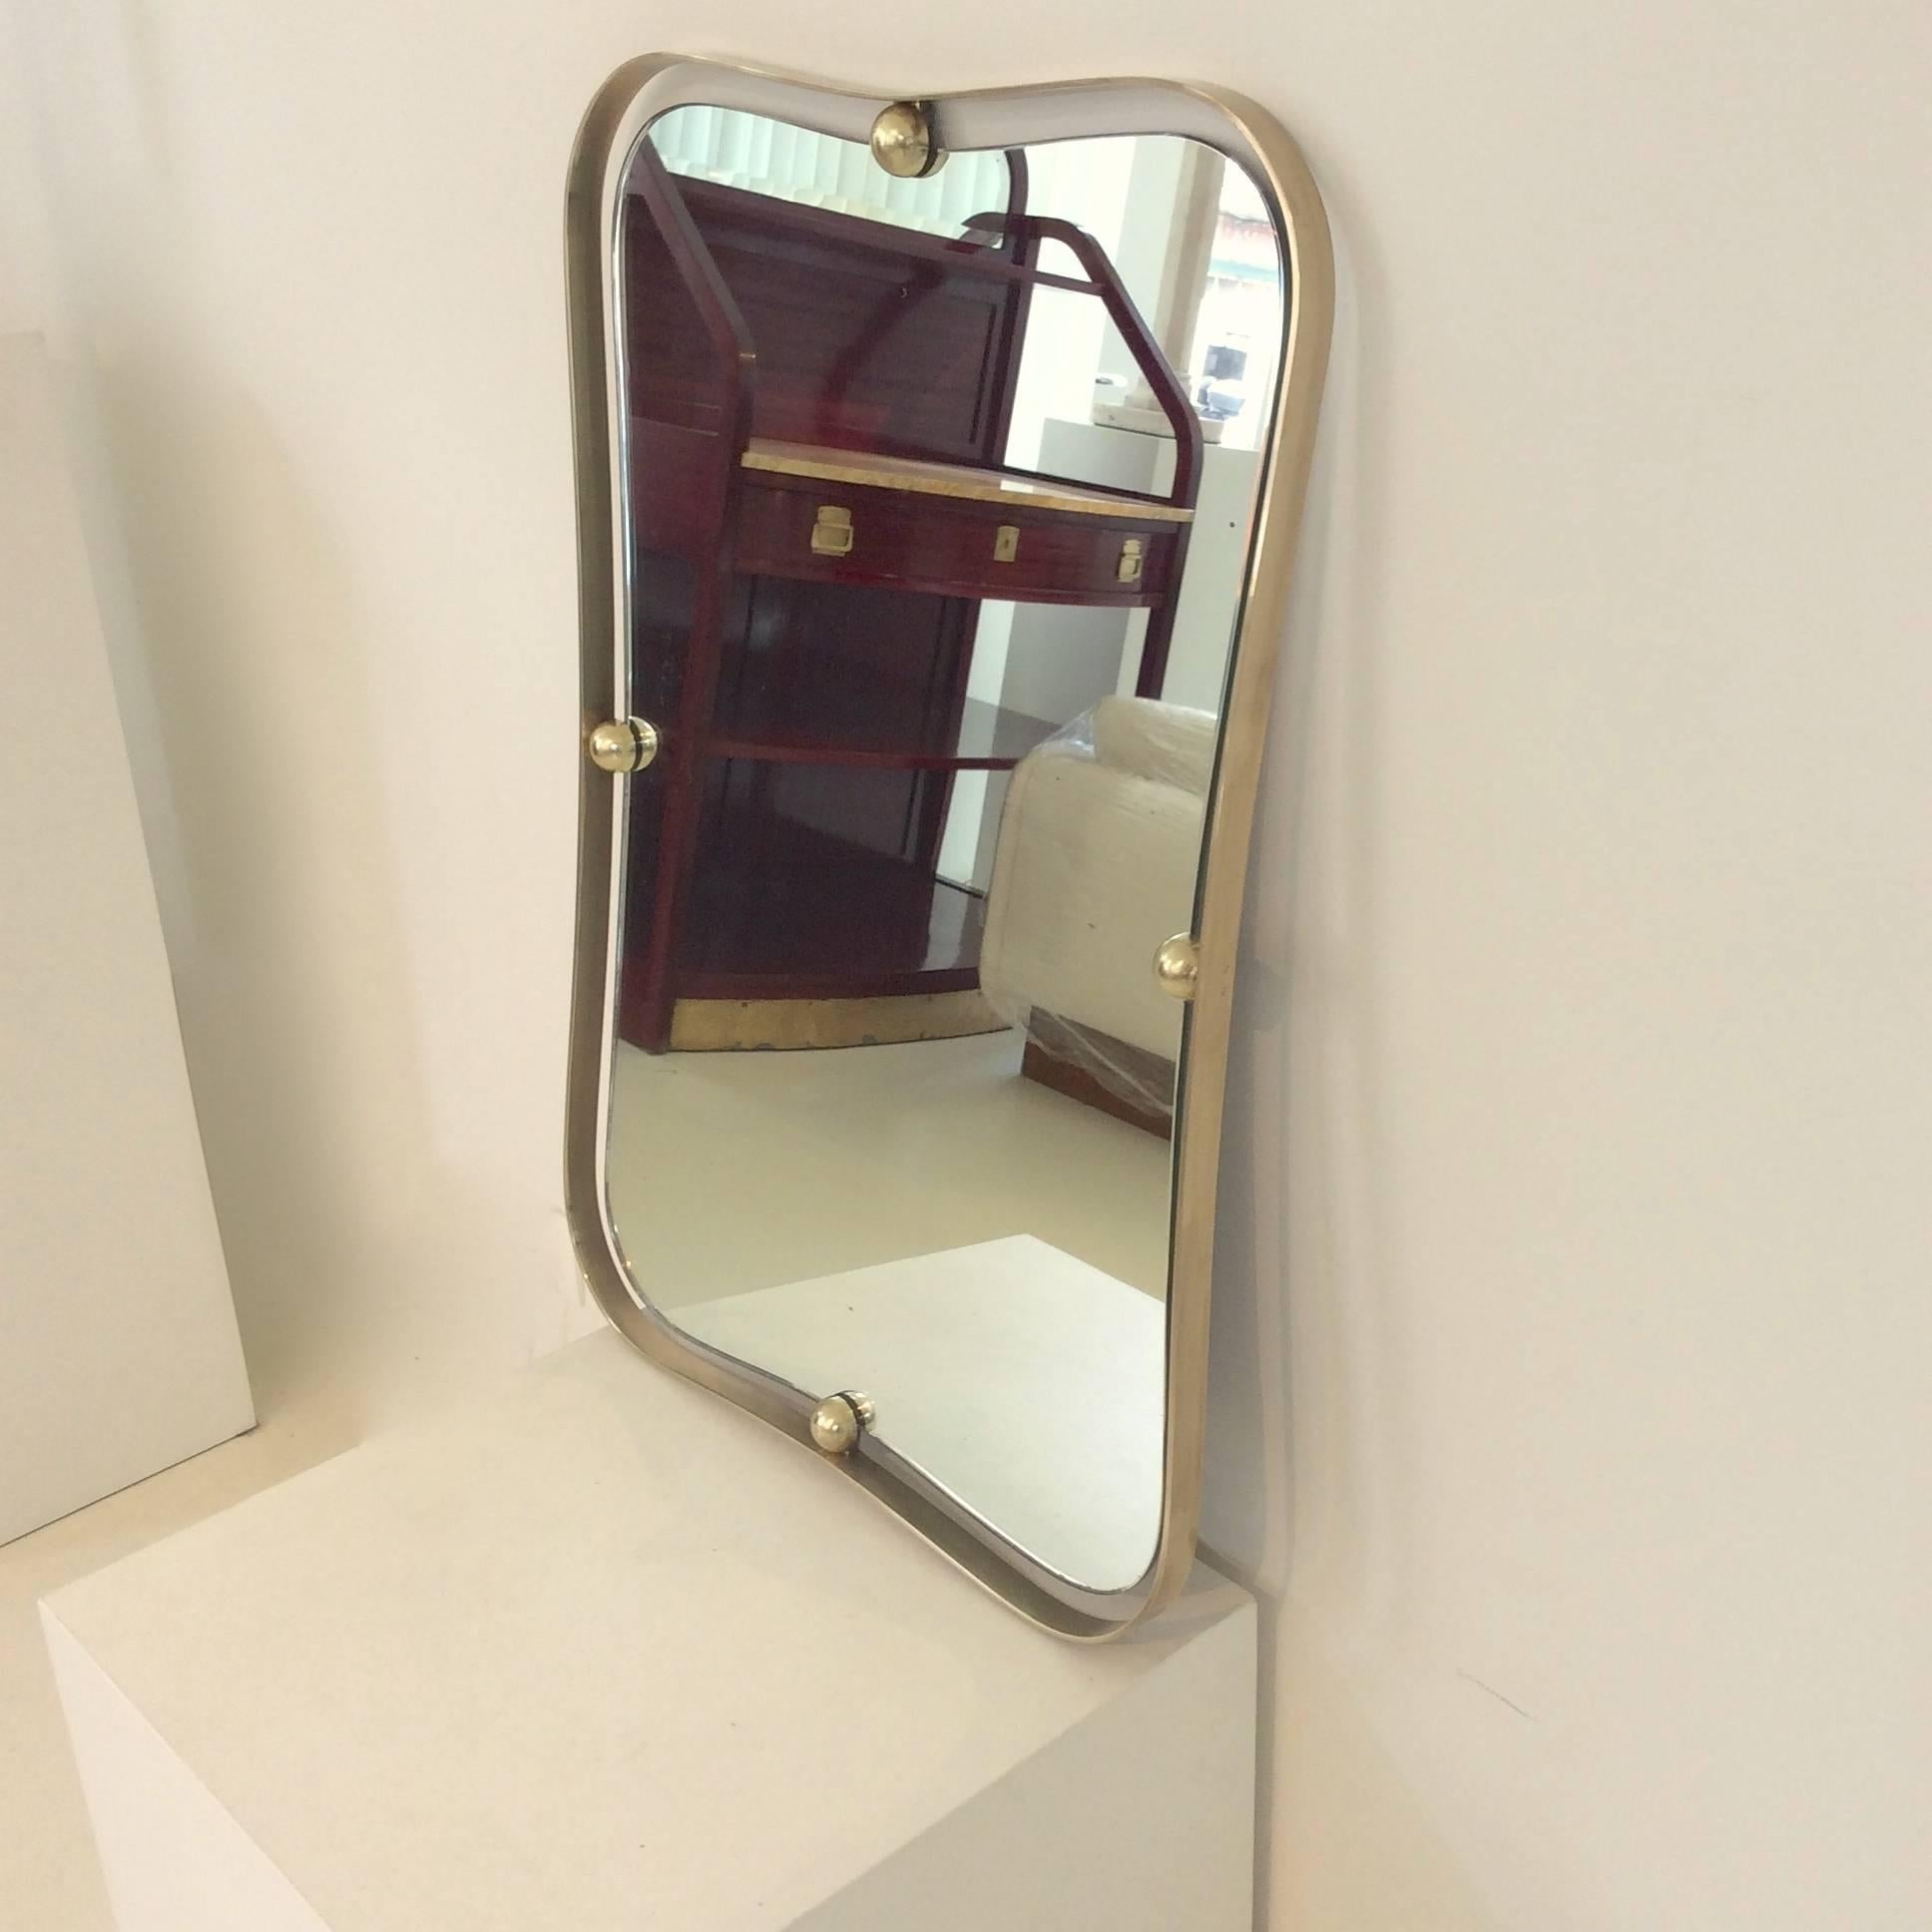 Elegant brass mirror, circa 1950 Italy, design attributed to Fontana Arte.
French designer Jean Royère has also made some object in the same style.

